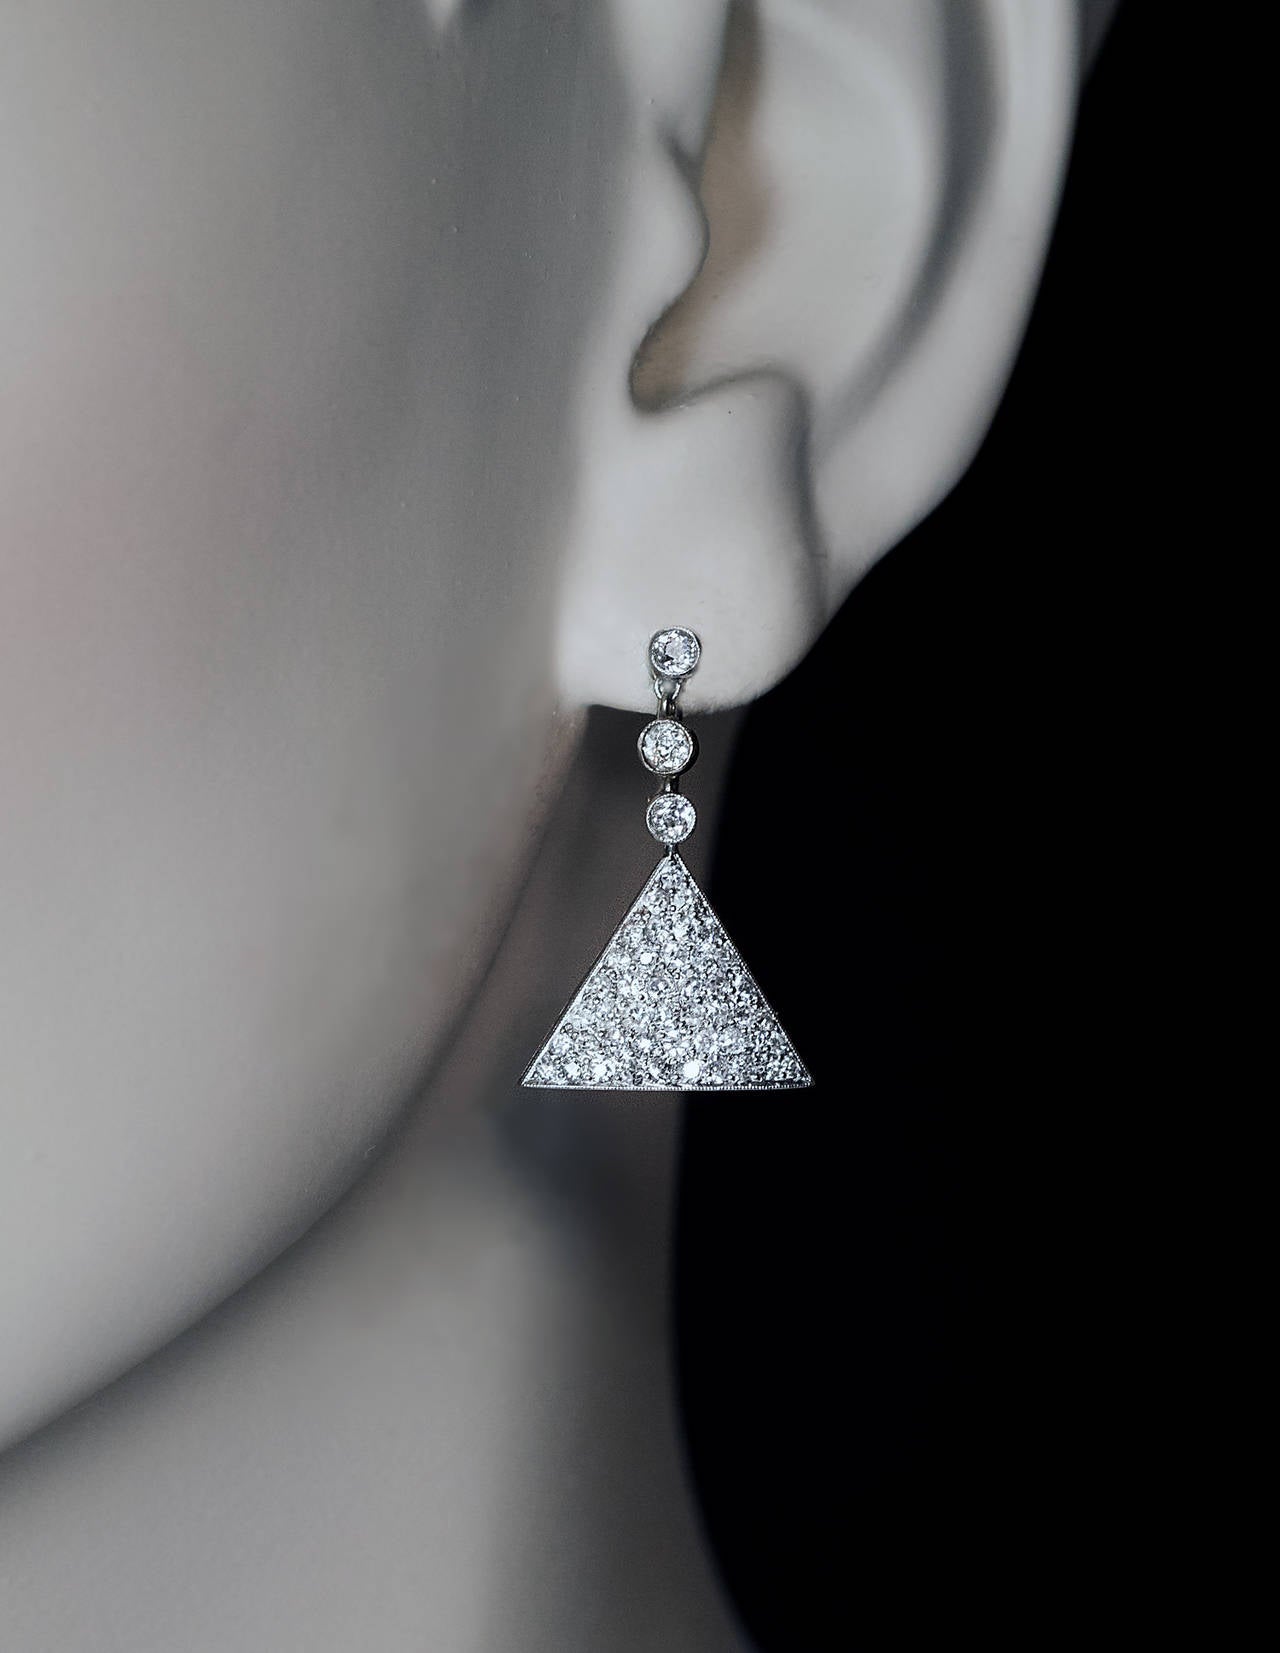 A pair of antique Edwardian era, circa 1910, platinum topped gold earrings pave-set with bright white (F-G color) sparkling old single cut diamonds

Estimated total diamond weight 2.10 ct

Total length 26 mm

Width 16 mm